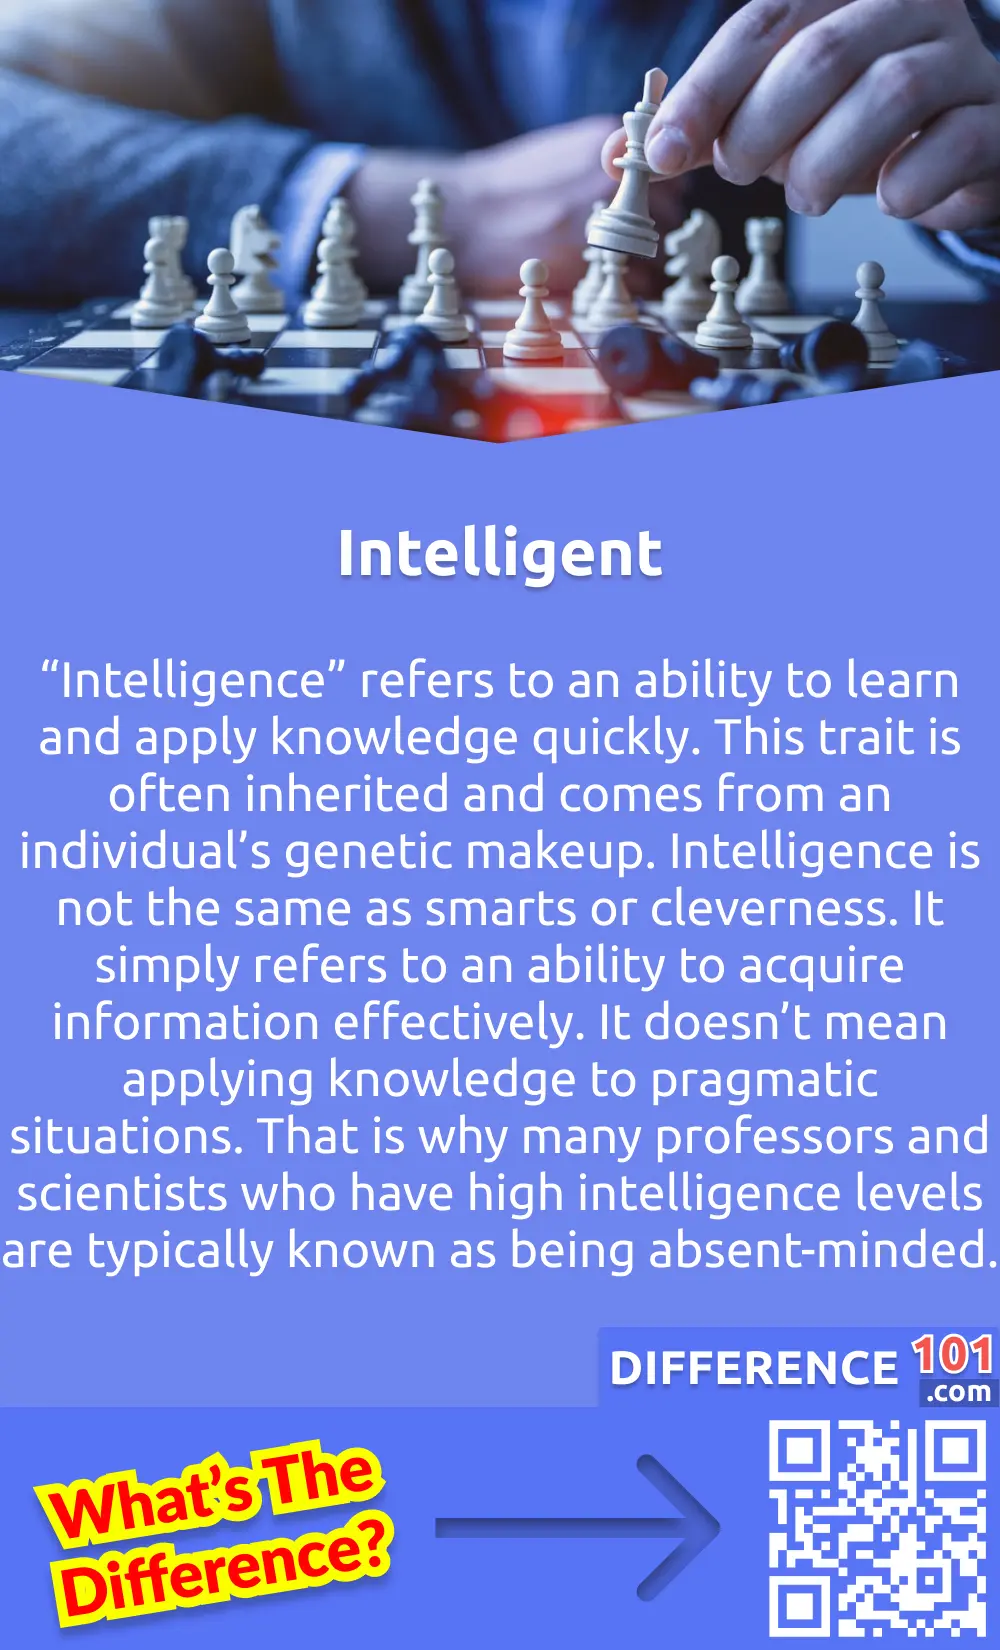 How to identify an intelligent person